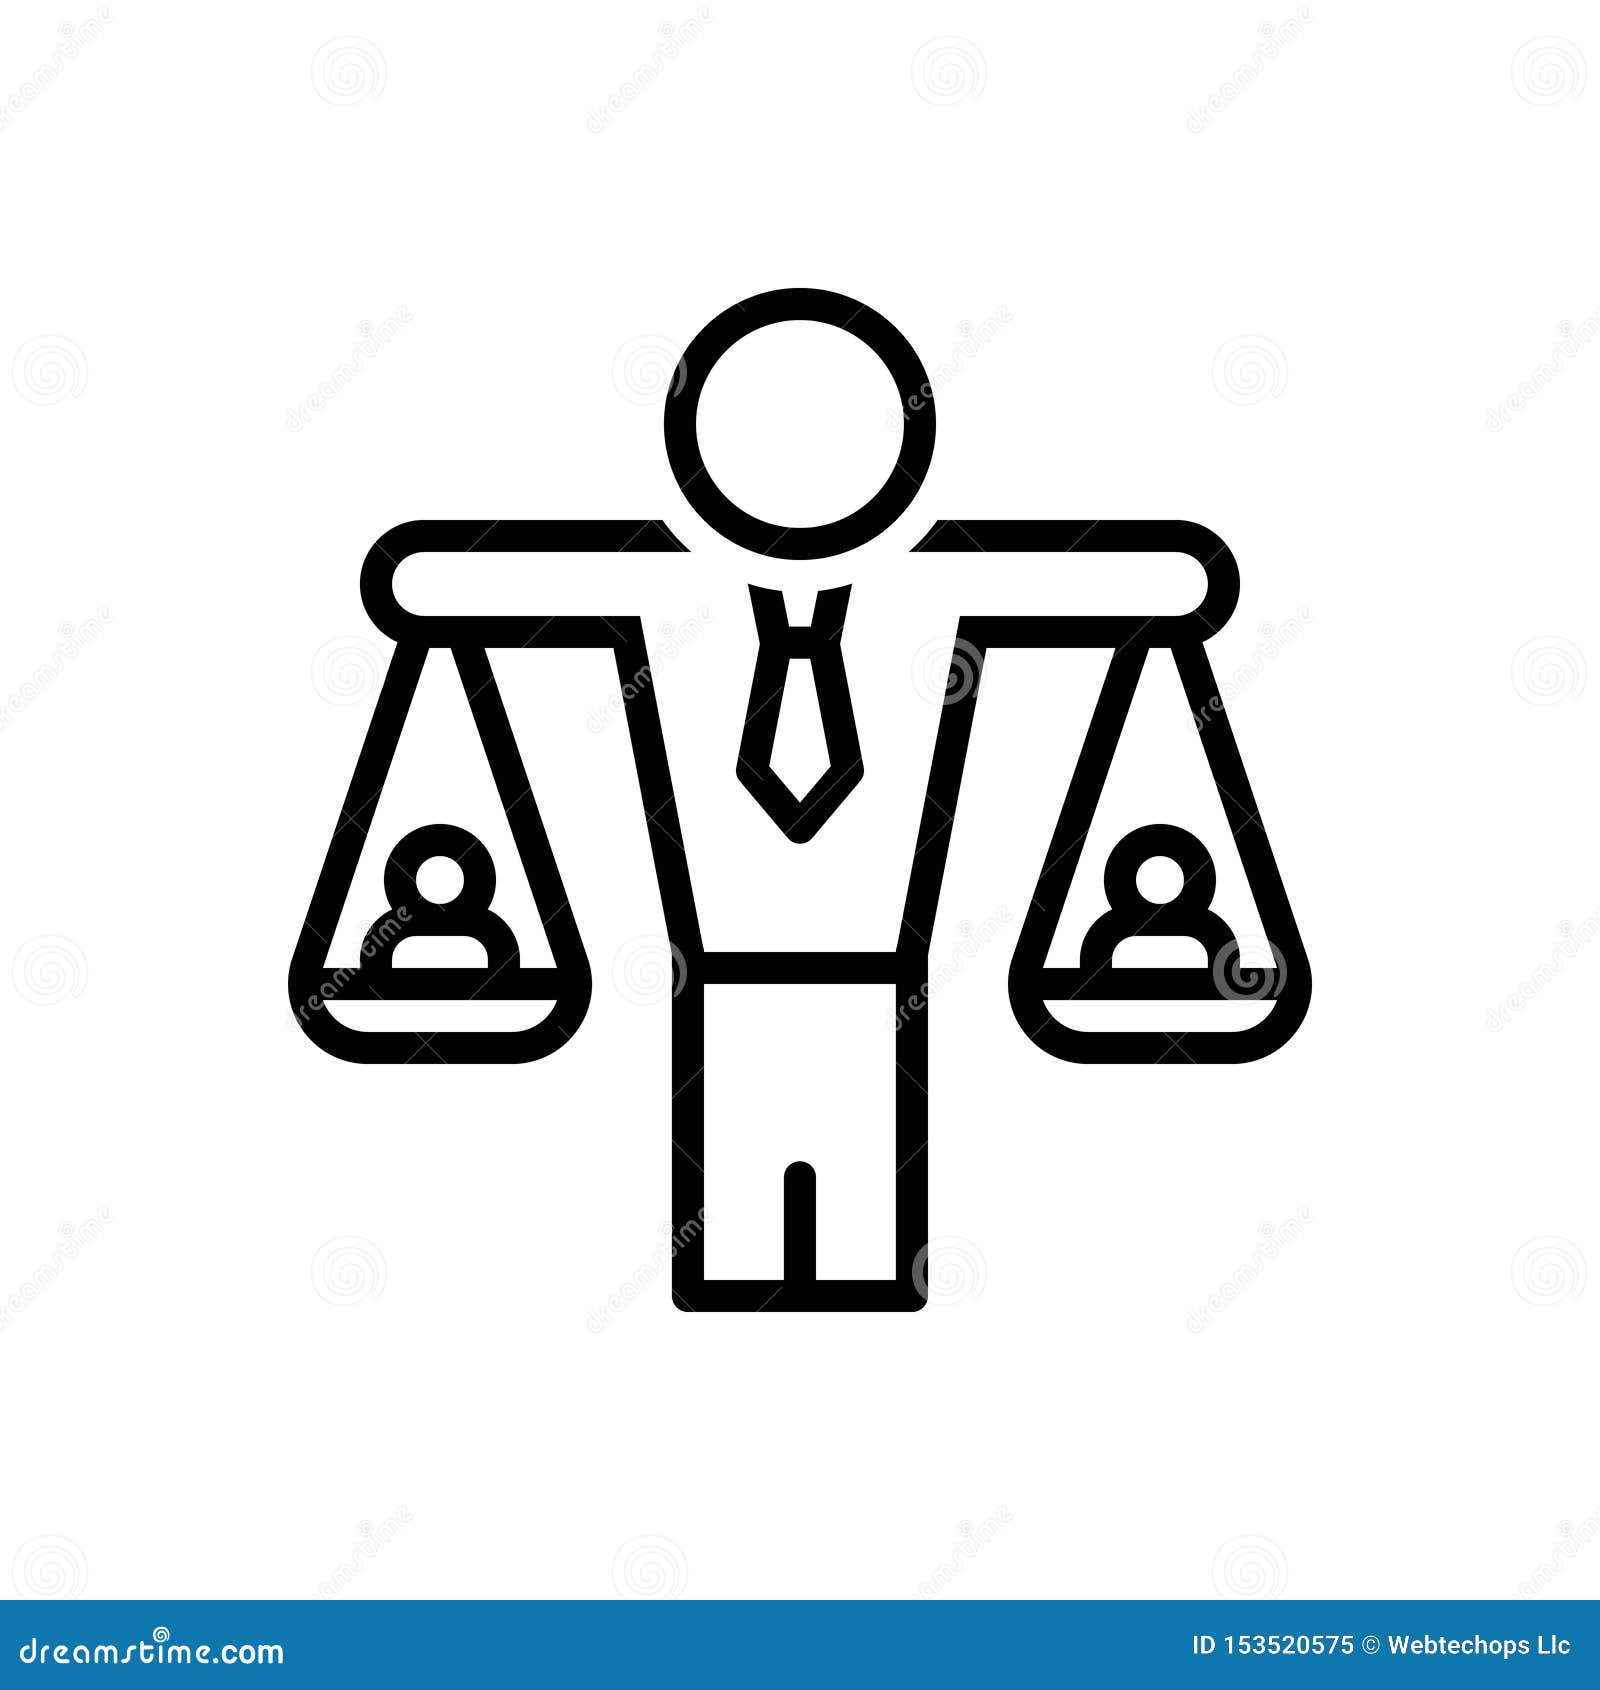 black line icon for human balanced scale, equivalence and scale